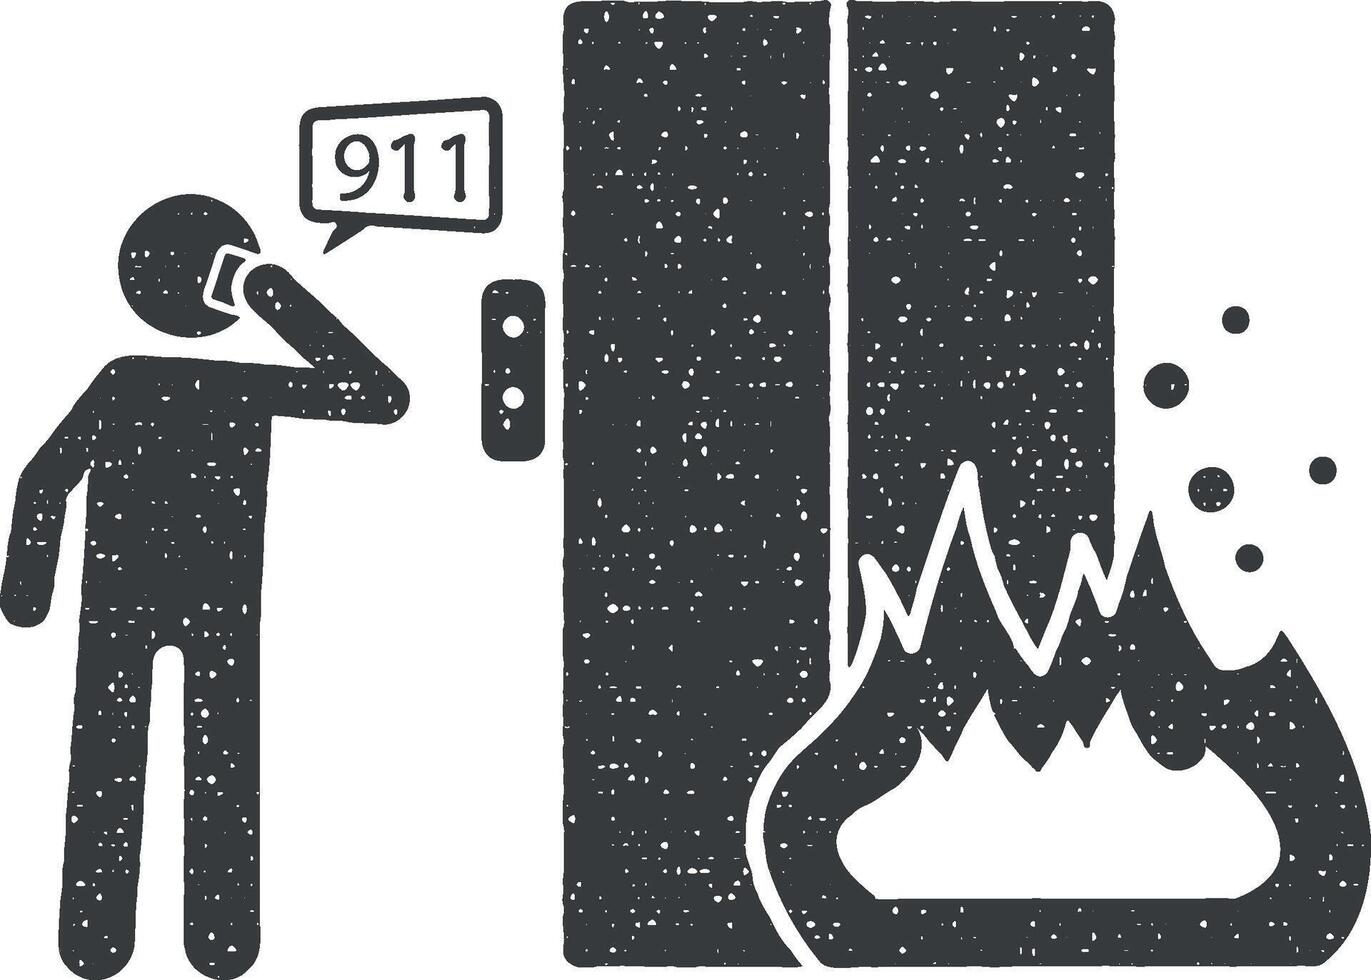 Man call about fire in elevator icon vector illustration in stamp style